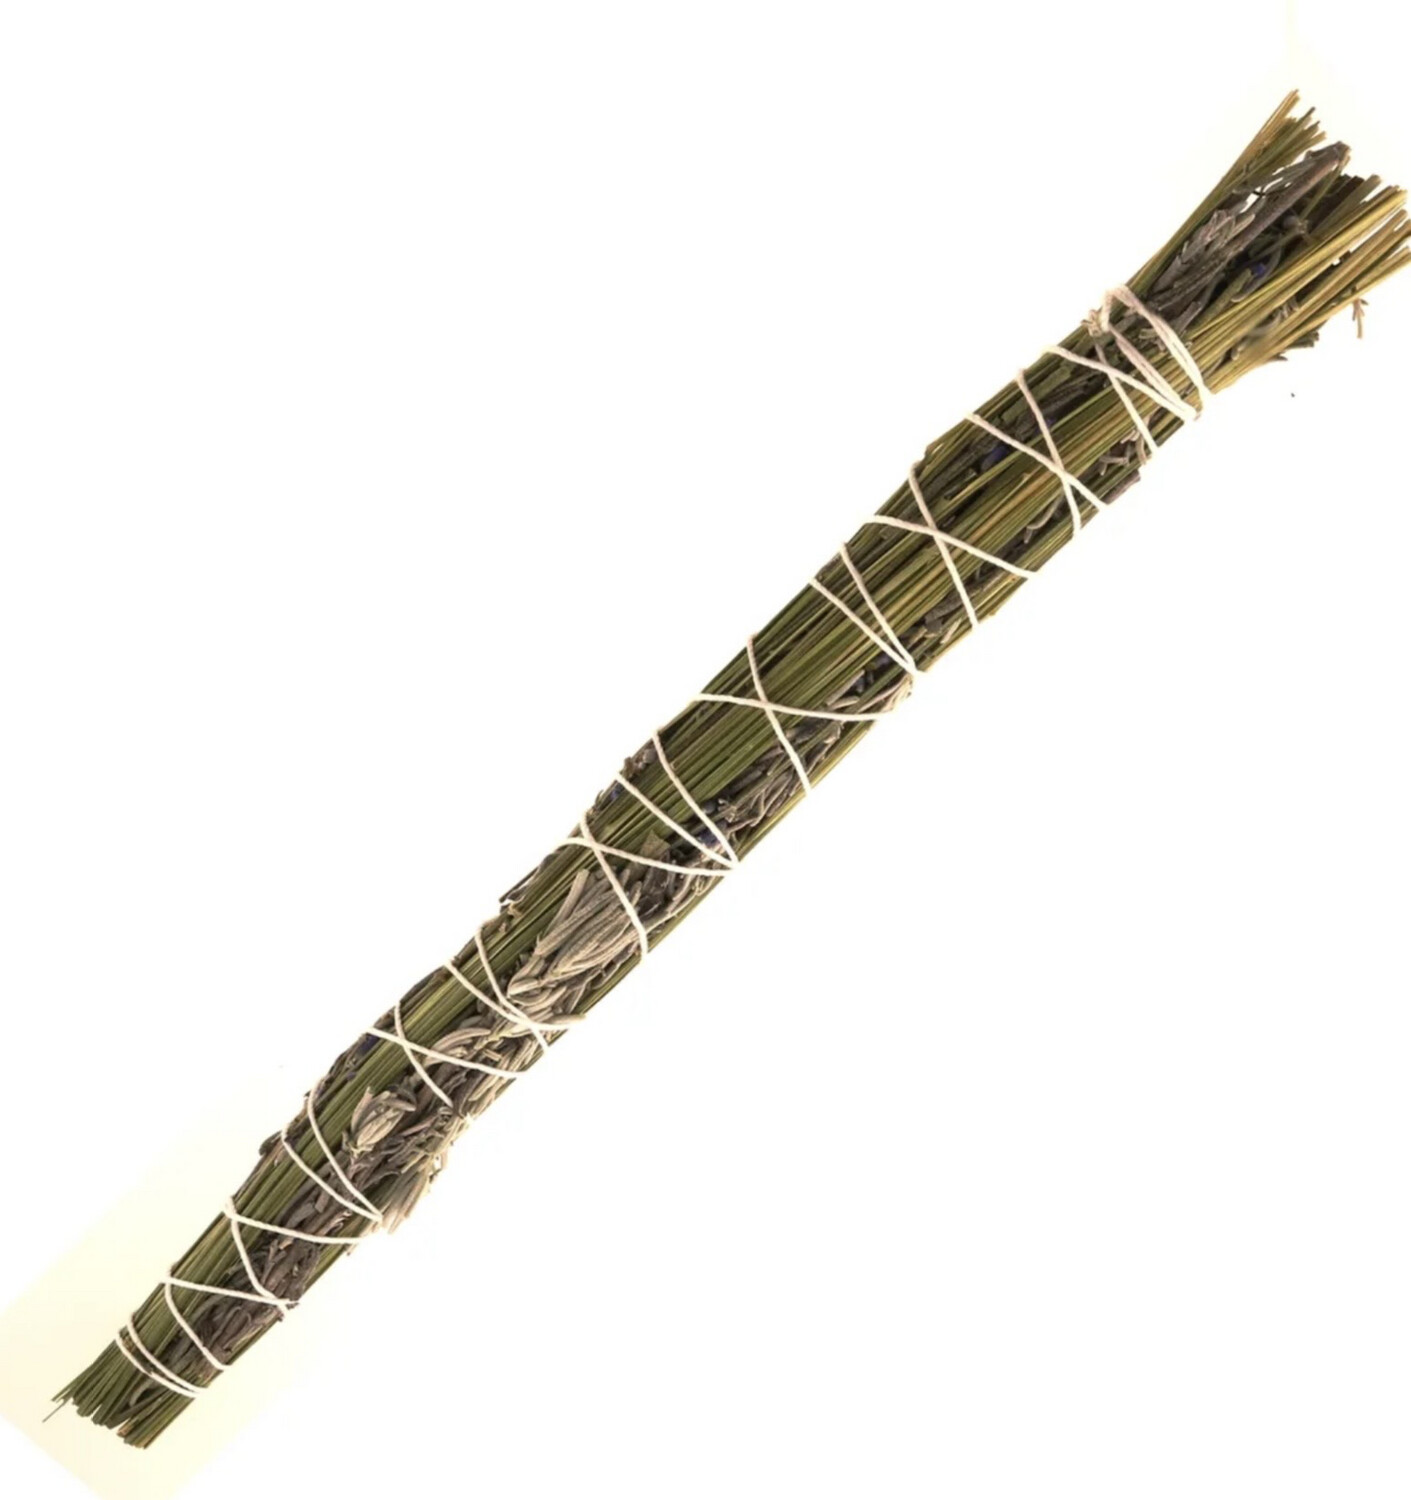 Sweetgrass And Lavender Smudge stick